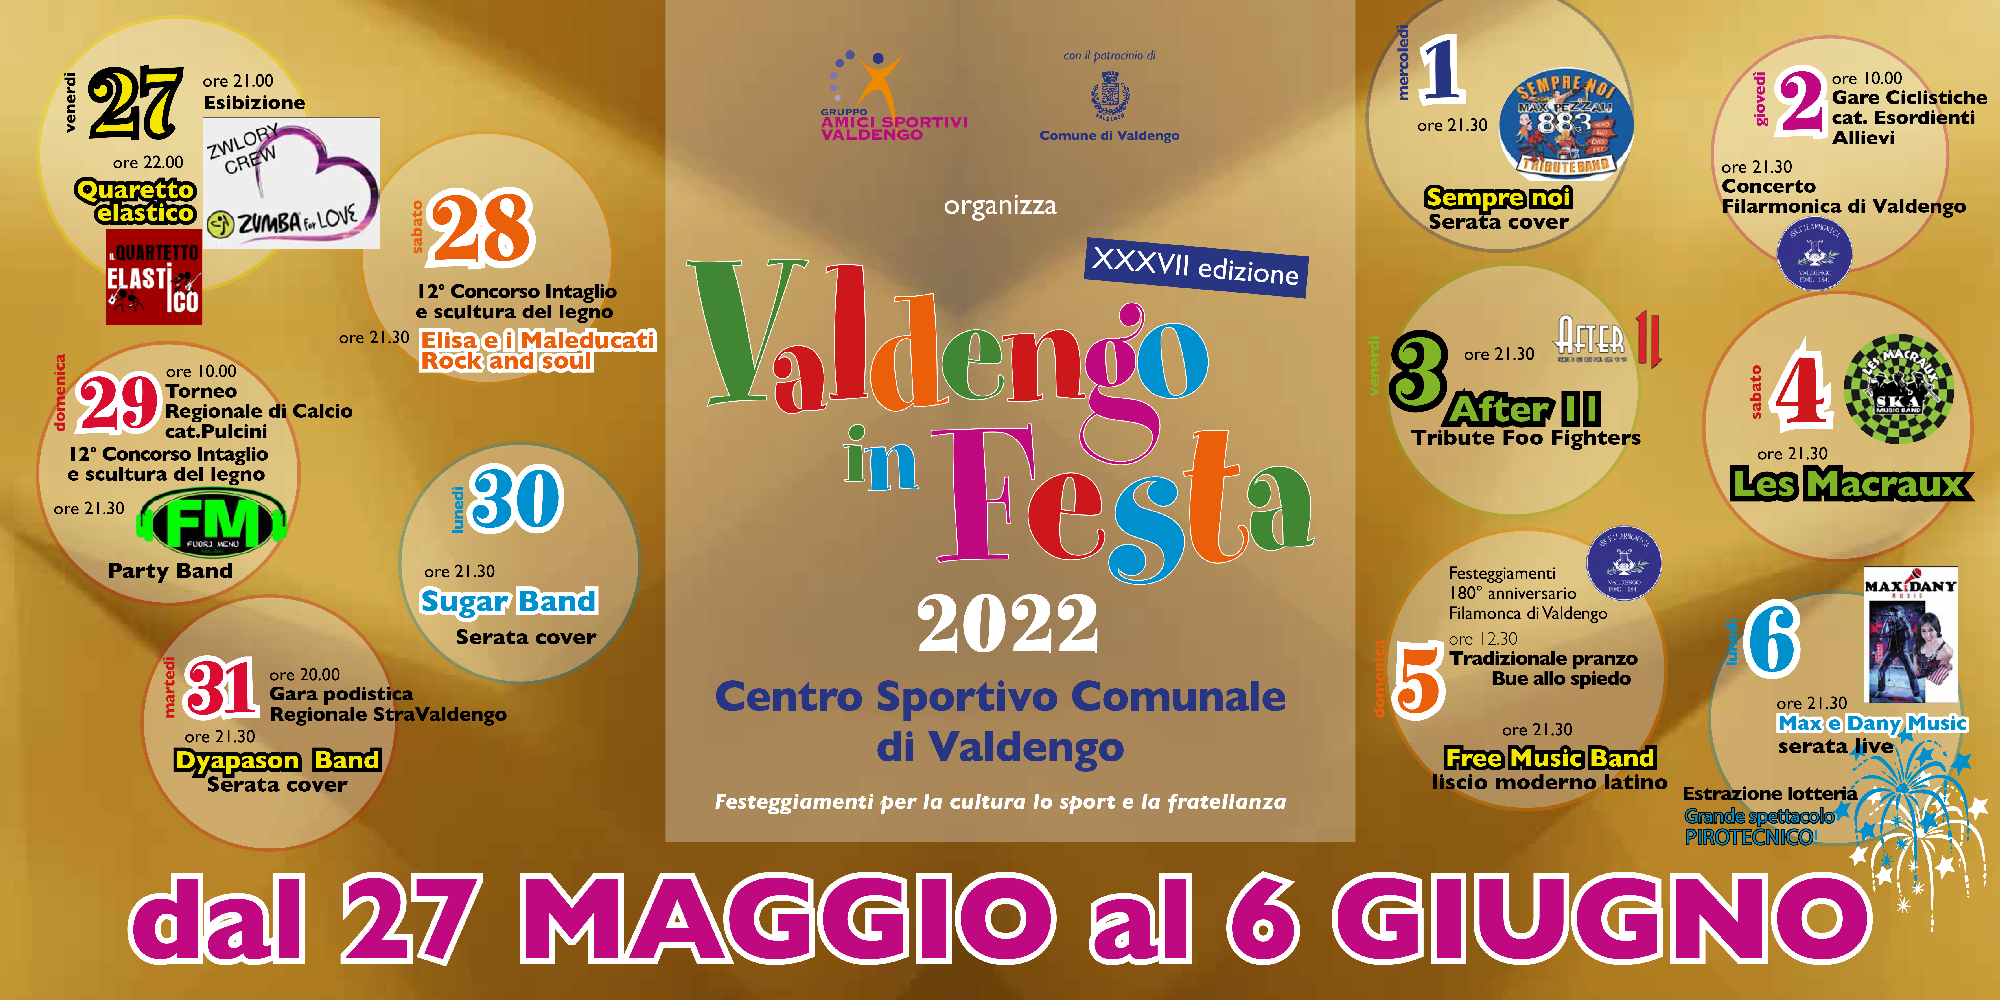 You are currently viewing Valdengo in Festa 2022